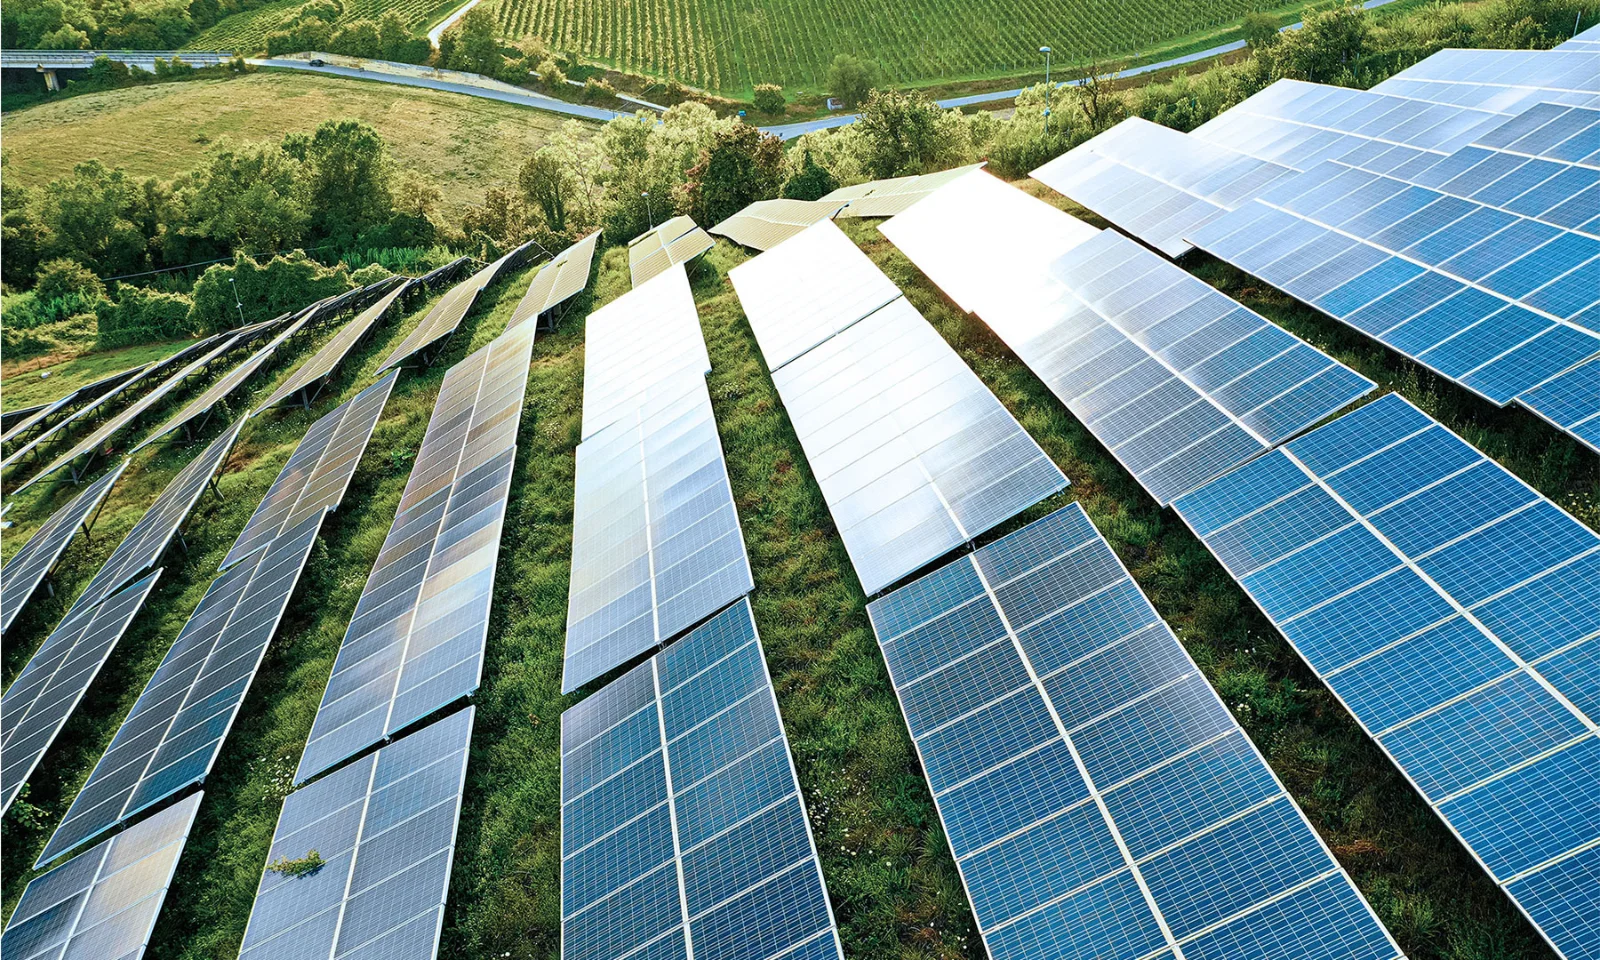 This image showcases a vast array of solar panels installed on a lush, green hillside, representing the concept of smart energy management and energy efficiency. The solar panels are strategically aligned to maximise sunlight capture, symbolising the use of renewable energy sources. The background features verdant fields and a winding road, further emphasising the harmony between advanced technology and the natural environment. This visual illustrates the integration of sustainable energy solutions in managing and reducing energy consumption, promoting a cleaner and more efficient energy future.